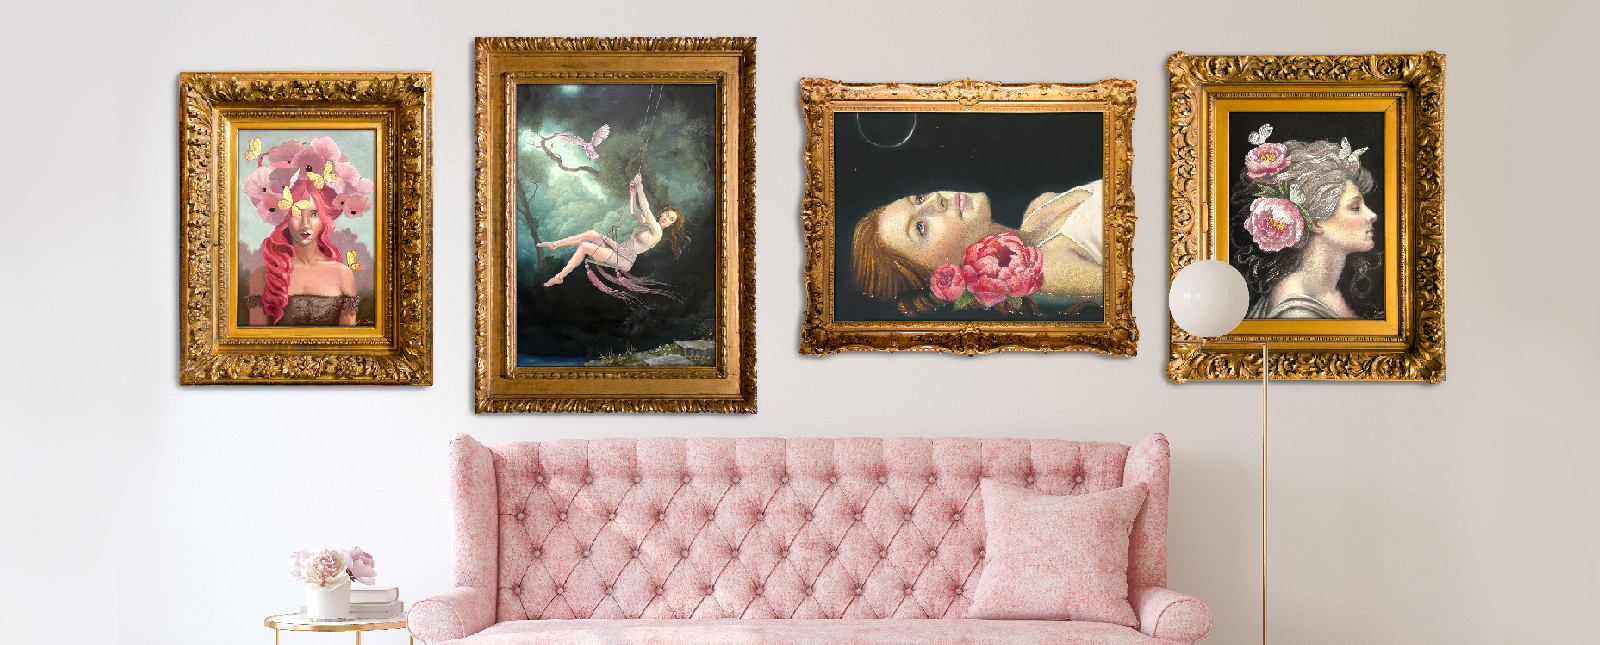 Four ornate gold-framed paintings of women, each in a surrealism style, hanging above a pink tufted sofa in an elegant living room setting.